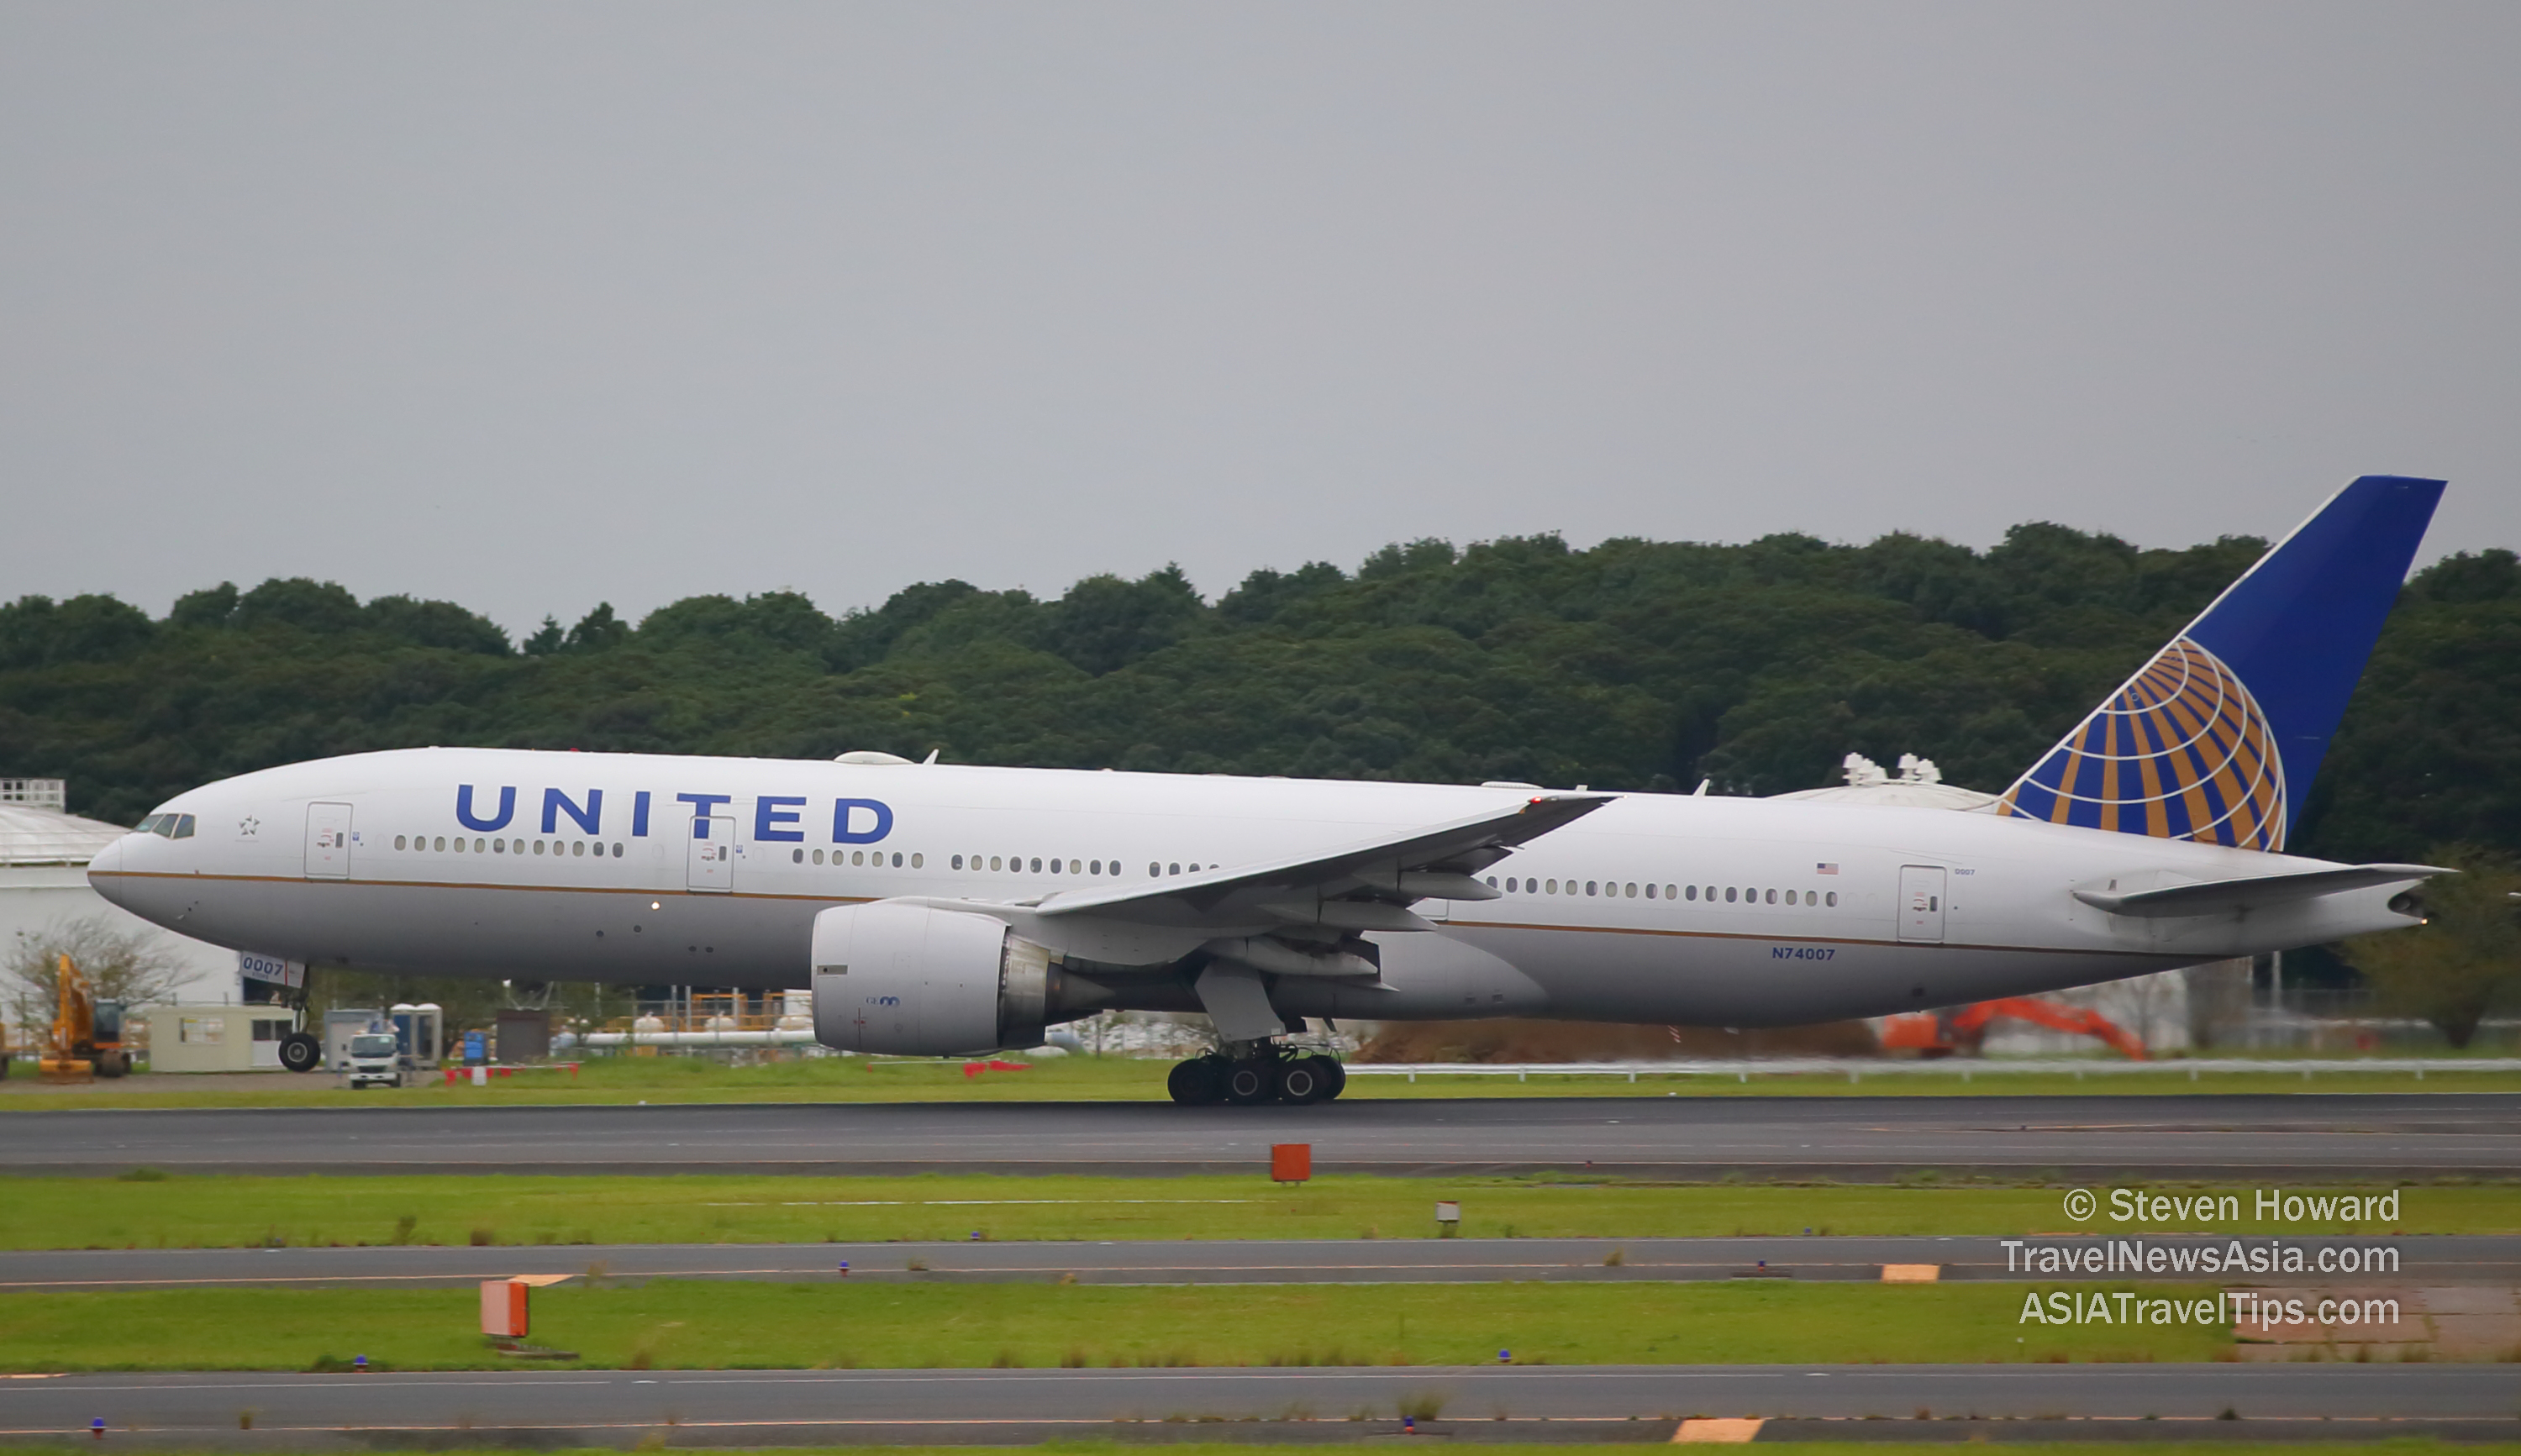 United Airlines Boeing 777 reg: N74007. Picture taken by Steven Howard of TravelNewsAsia.com at Narita Airport near Tokyo, Japan. Click to enlarge.